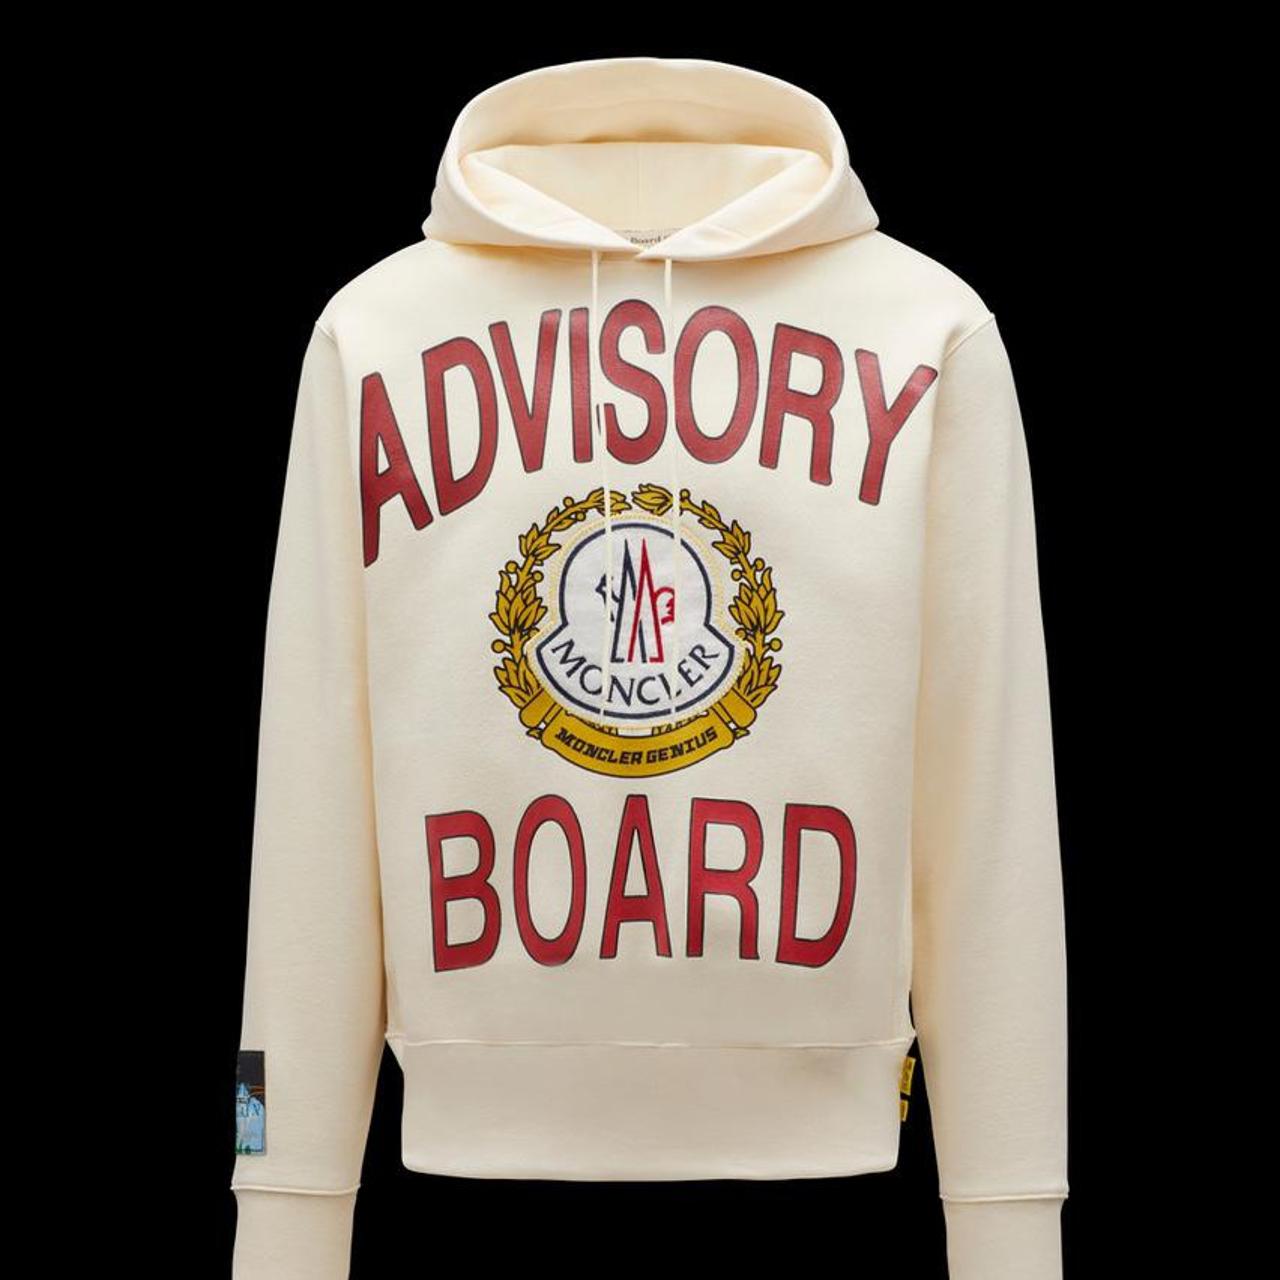 Moncler X Advisory Board Crystals Hoodie , “This